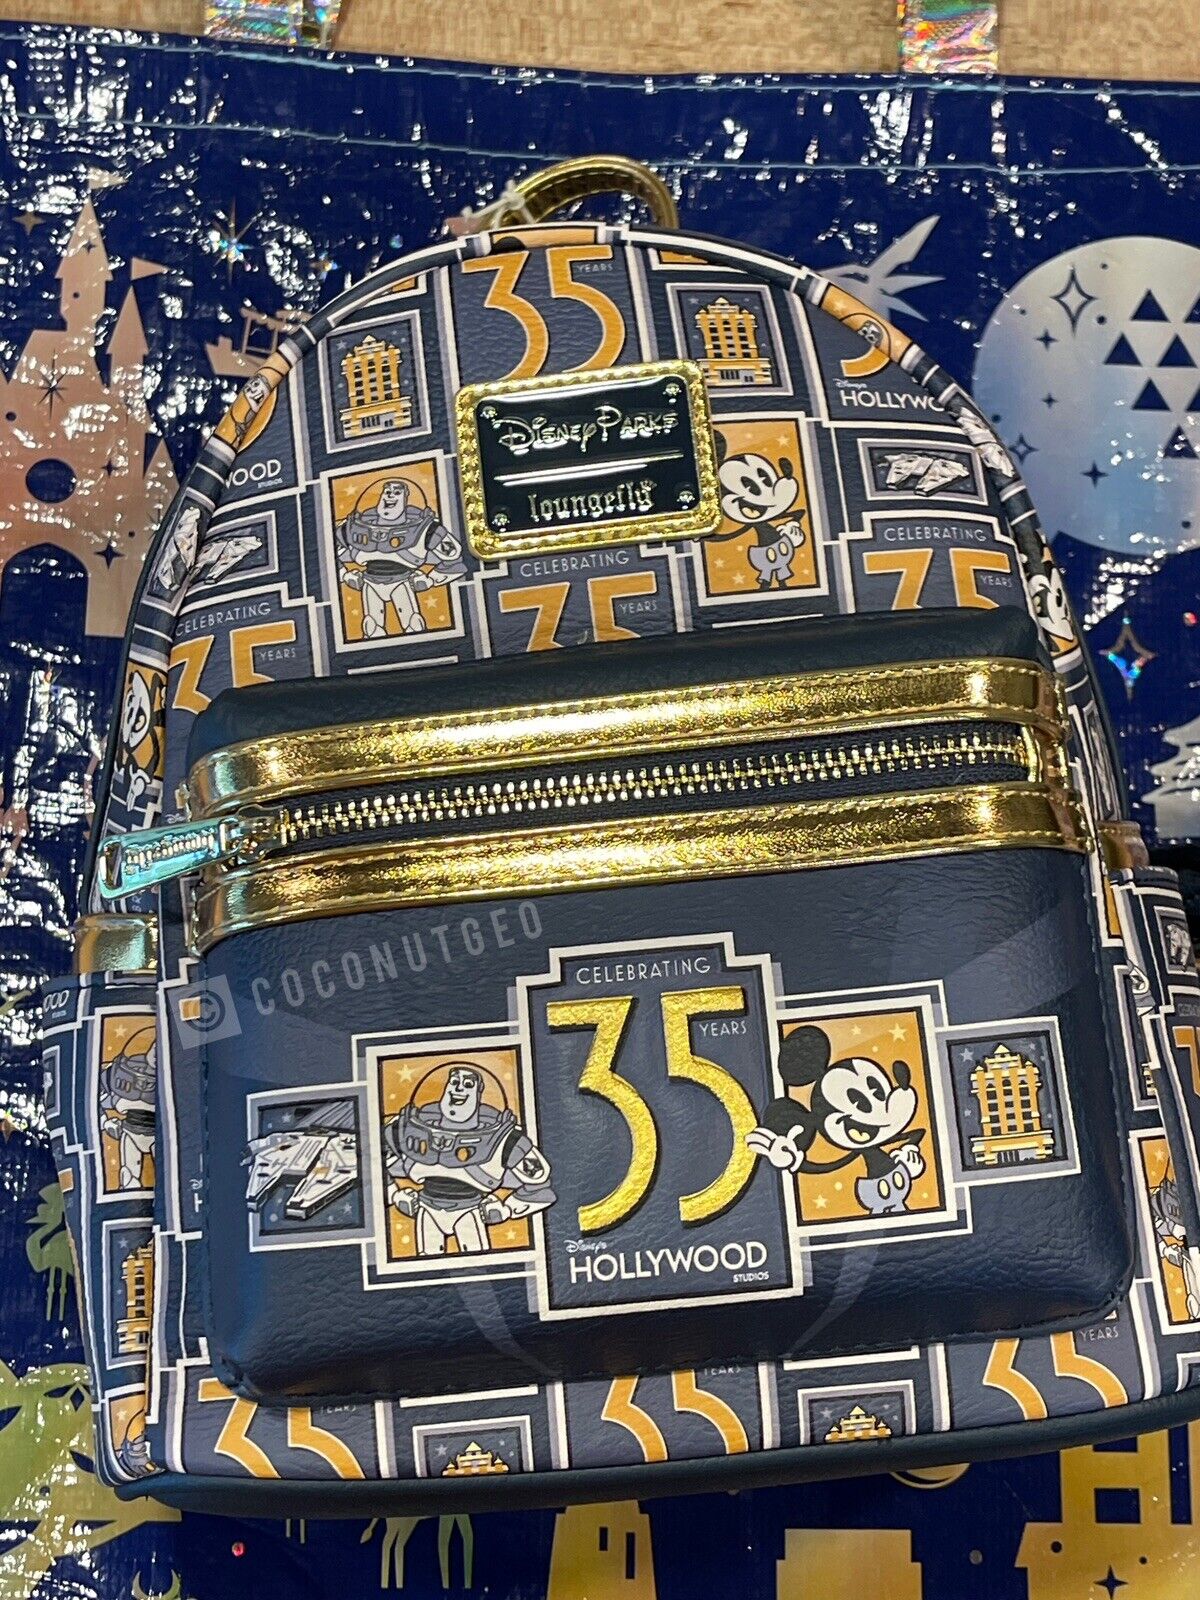 2024 Disney Parks X Hollywood Studios 35th Anniversary Loungefly Backpack 💥